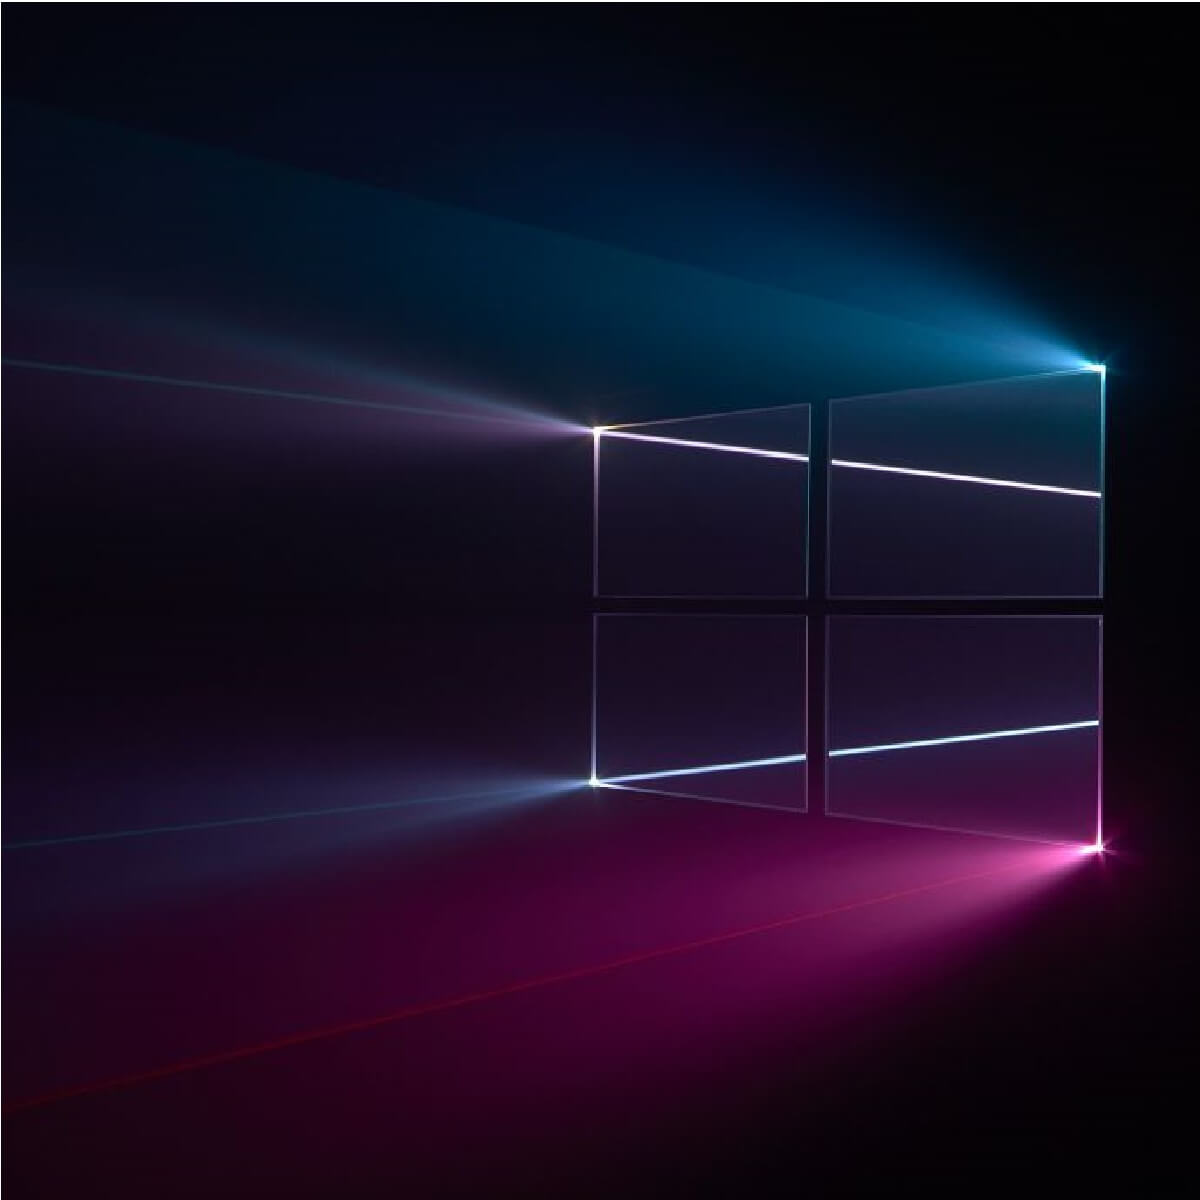 Download the Windows 10 March Patch Tuesday updates today